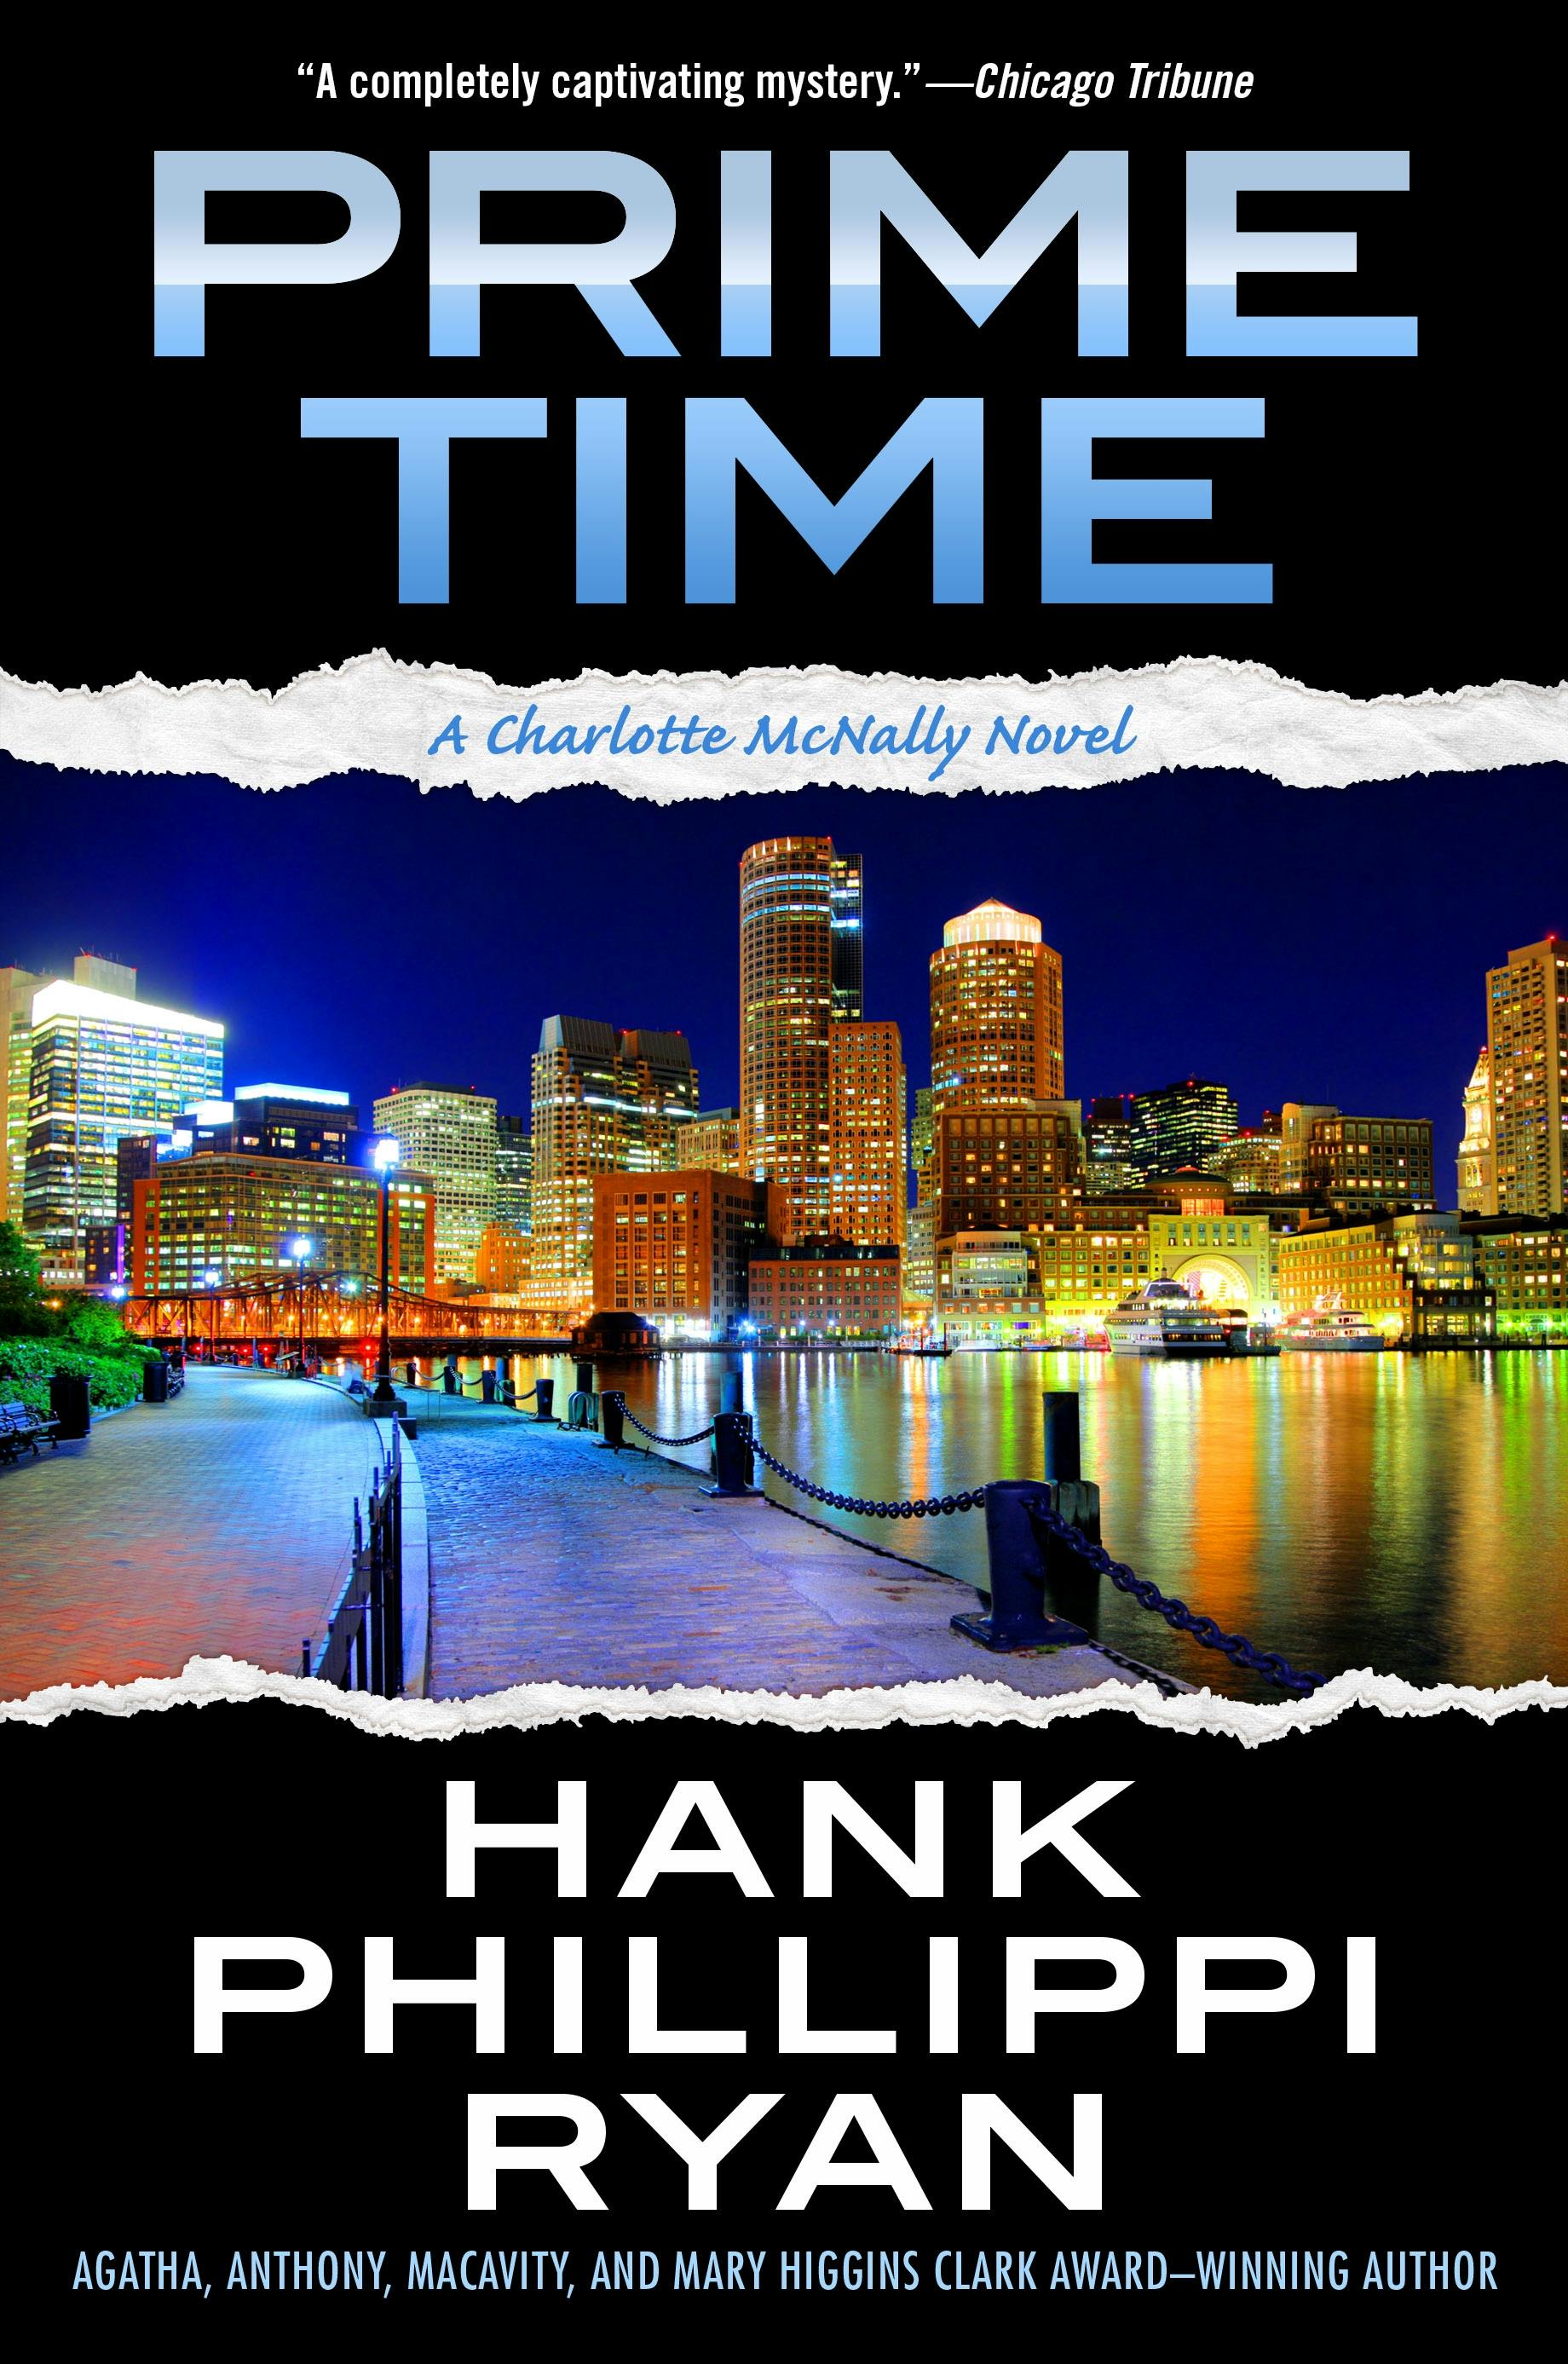 Cover for the book titled as: Prime Time